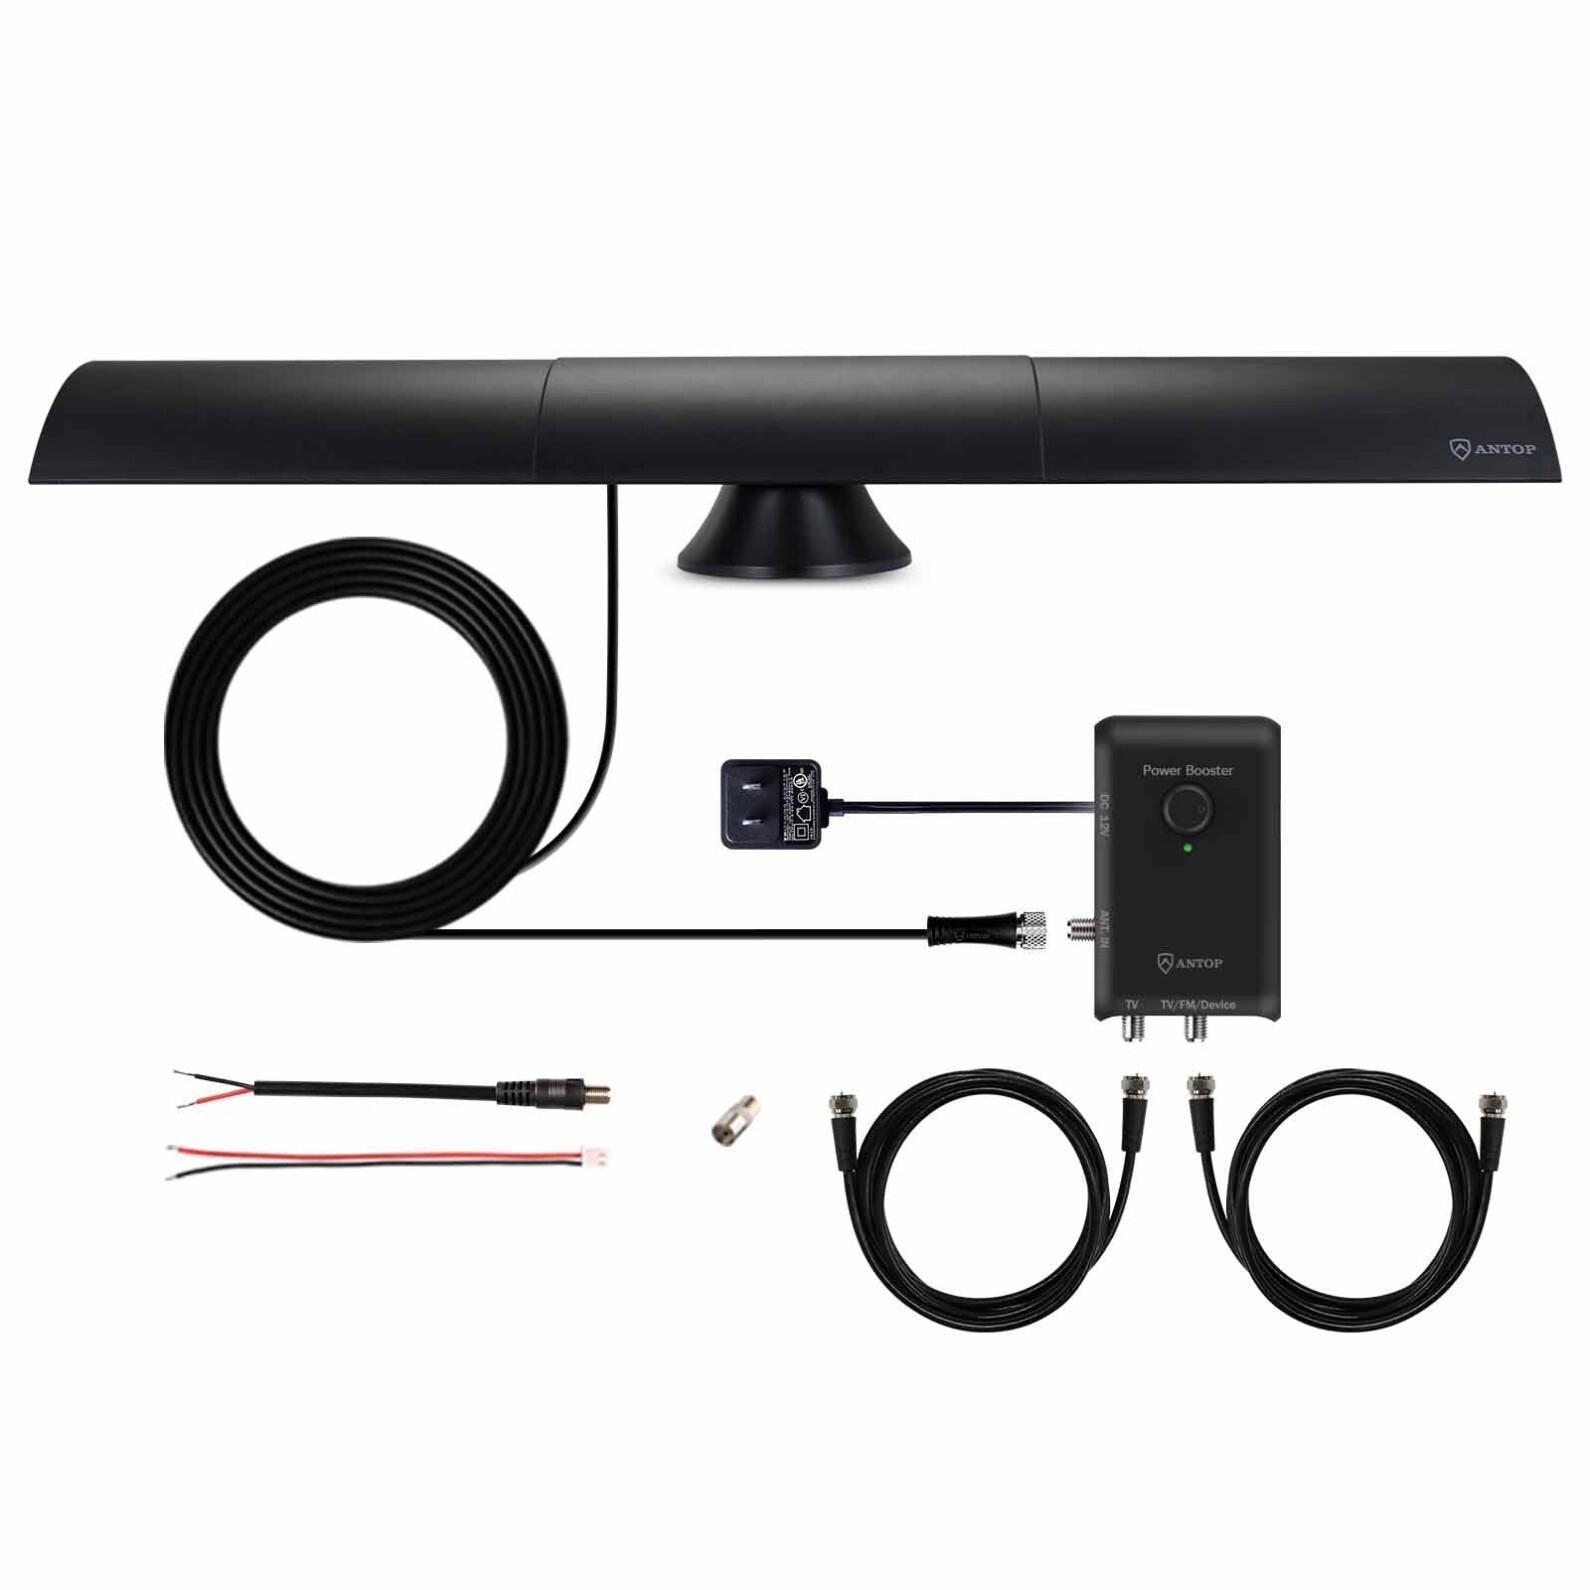 Antop at-500SBS Amplified HDTV&Fm Antenna, Noise-F